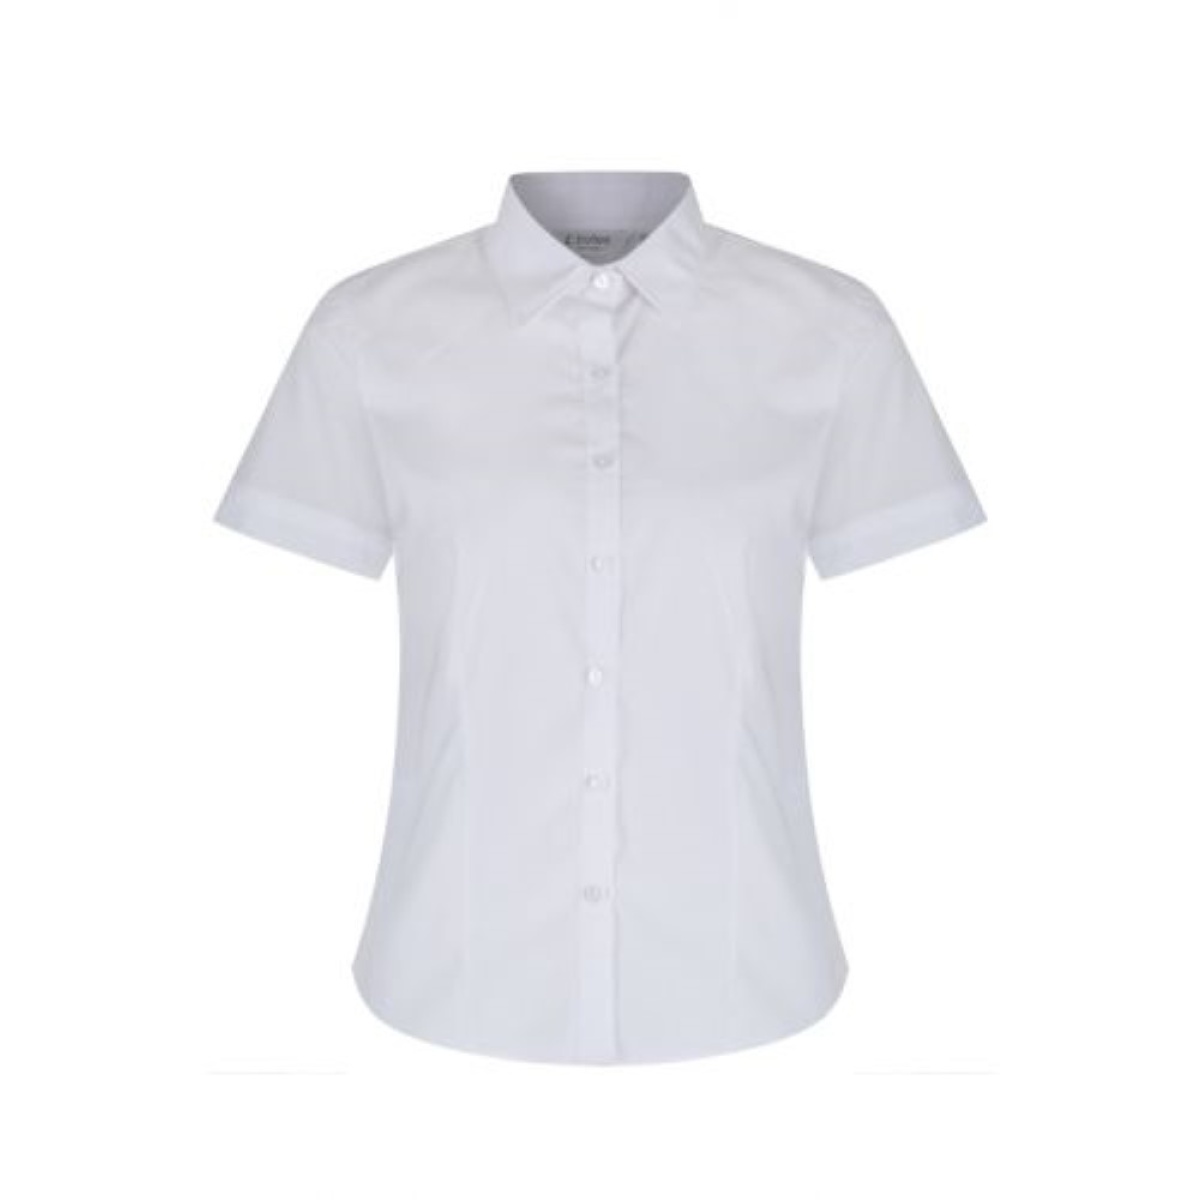 Blouse White - Twin Pack - Short Sleeve - Trutex, James Hornsby School, Beauchamps High School, Shirts & Blouses, Castle View School, Cornelius Vermuyden